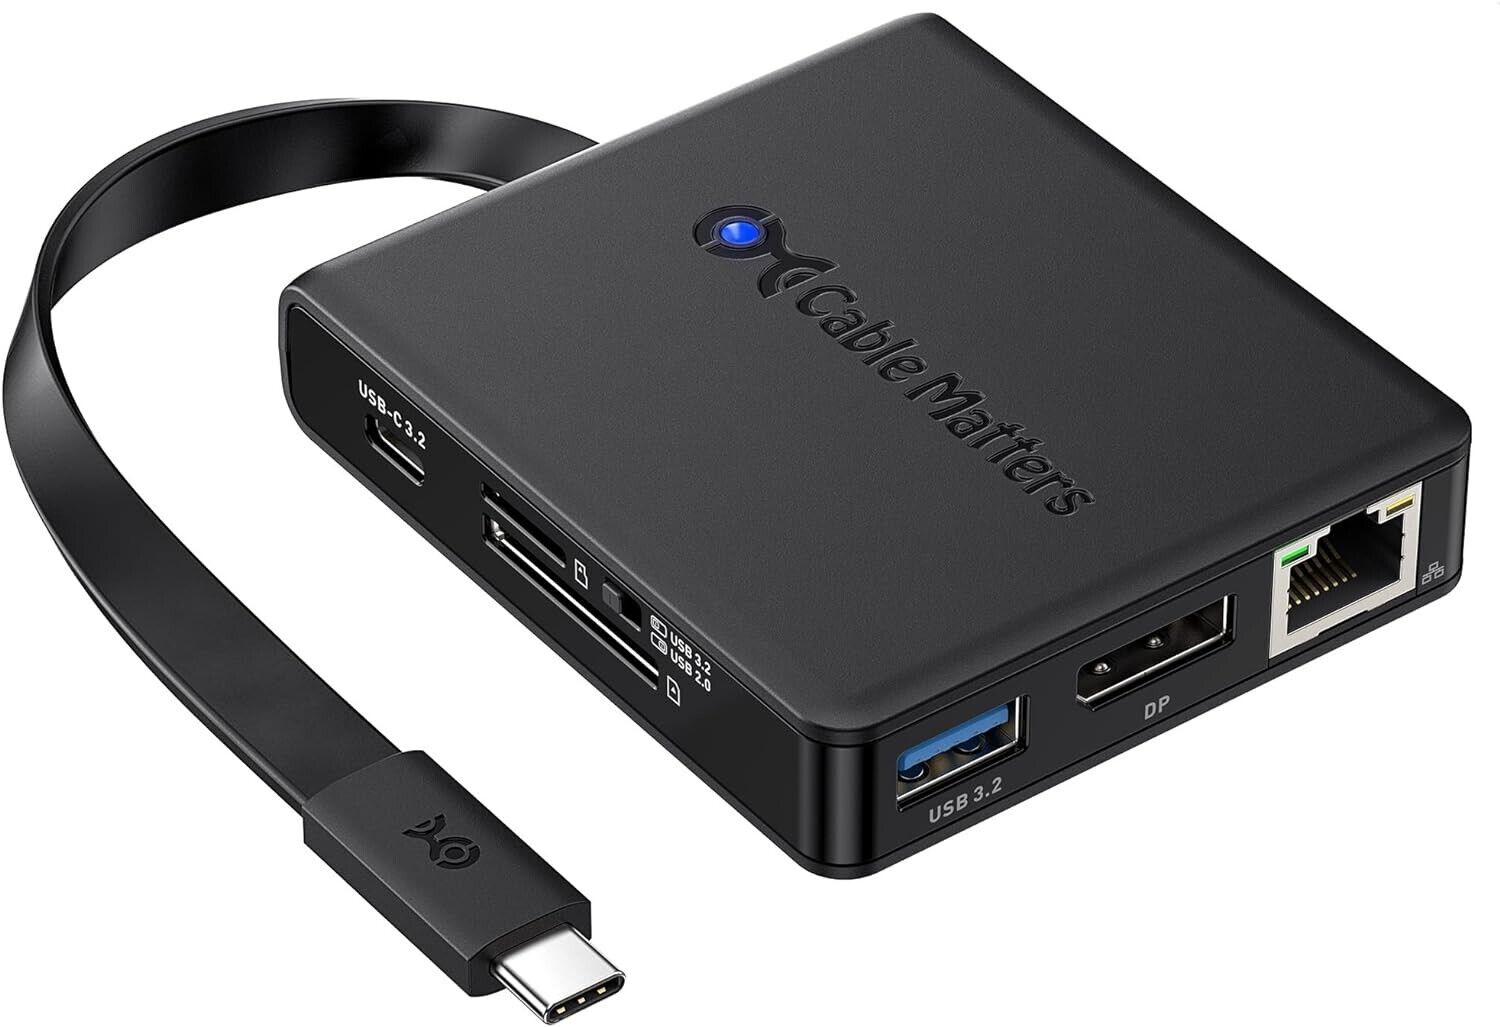 Cable Matters 8-in-1 8K DisplayPort 100W PD USB 3.2 Ethernet USB C Hub Adapter